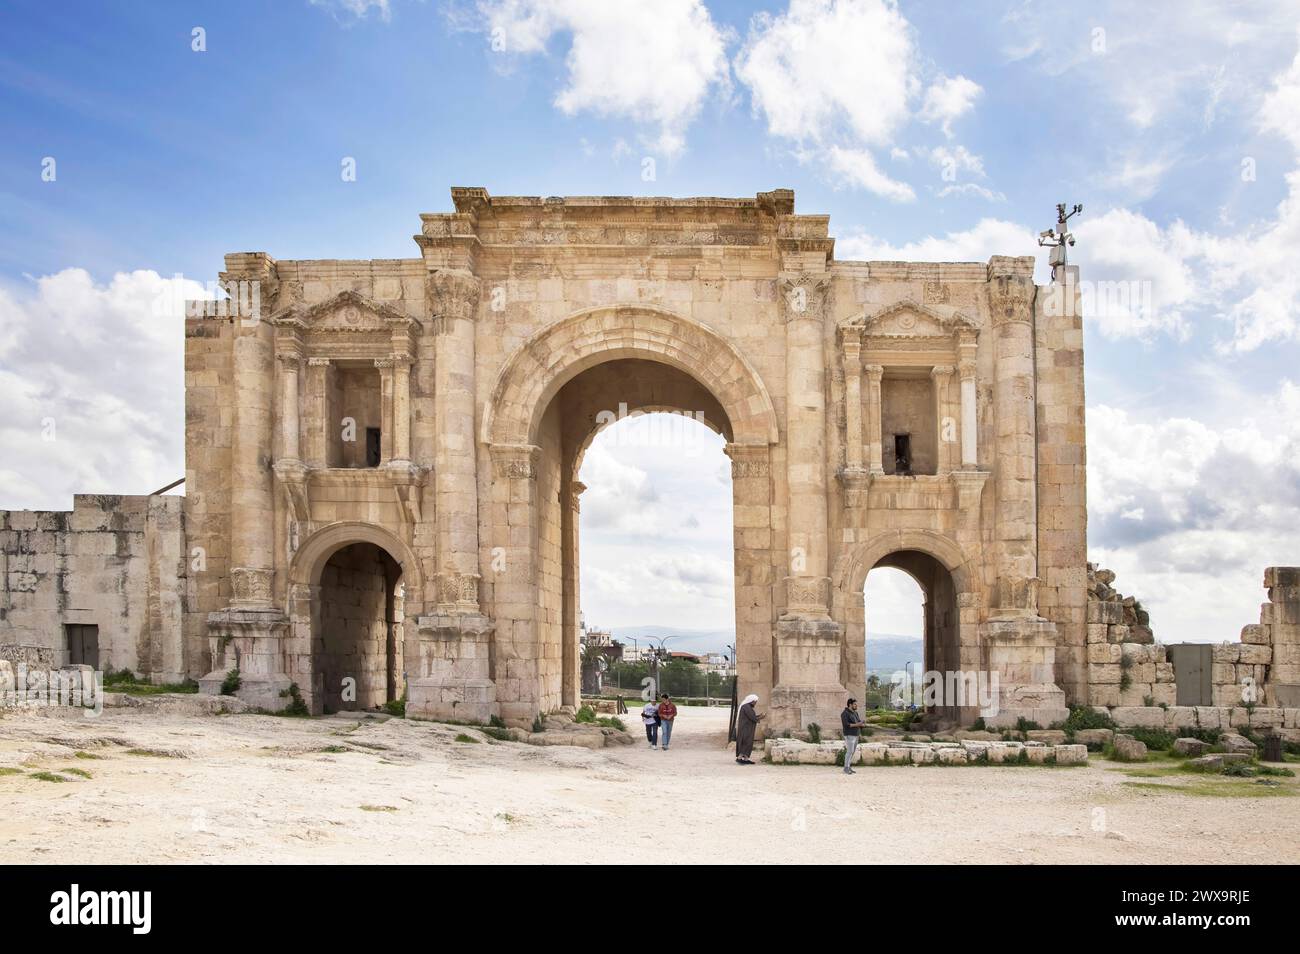 hadrians arch the entrance to the greco roman ruins of jerash in jordan Stock Photo